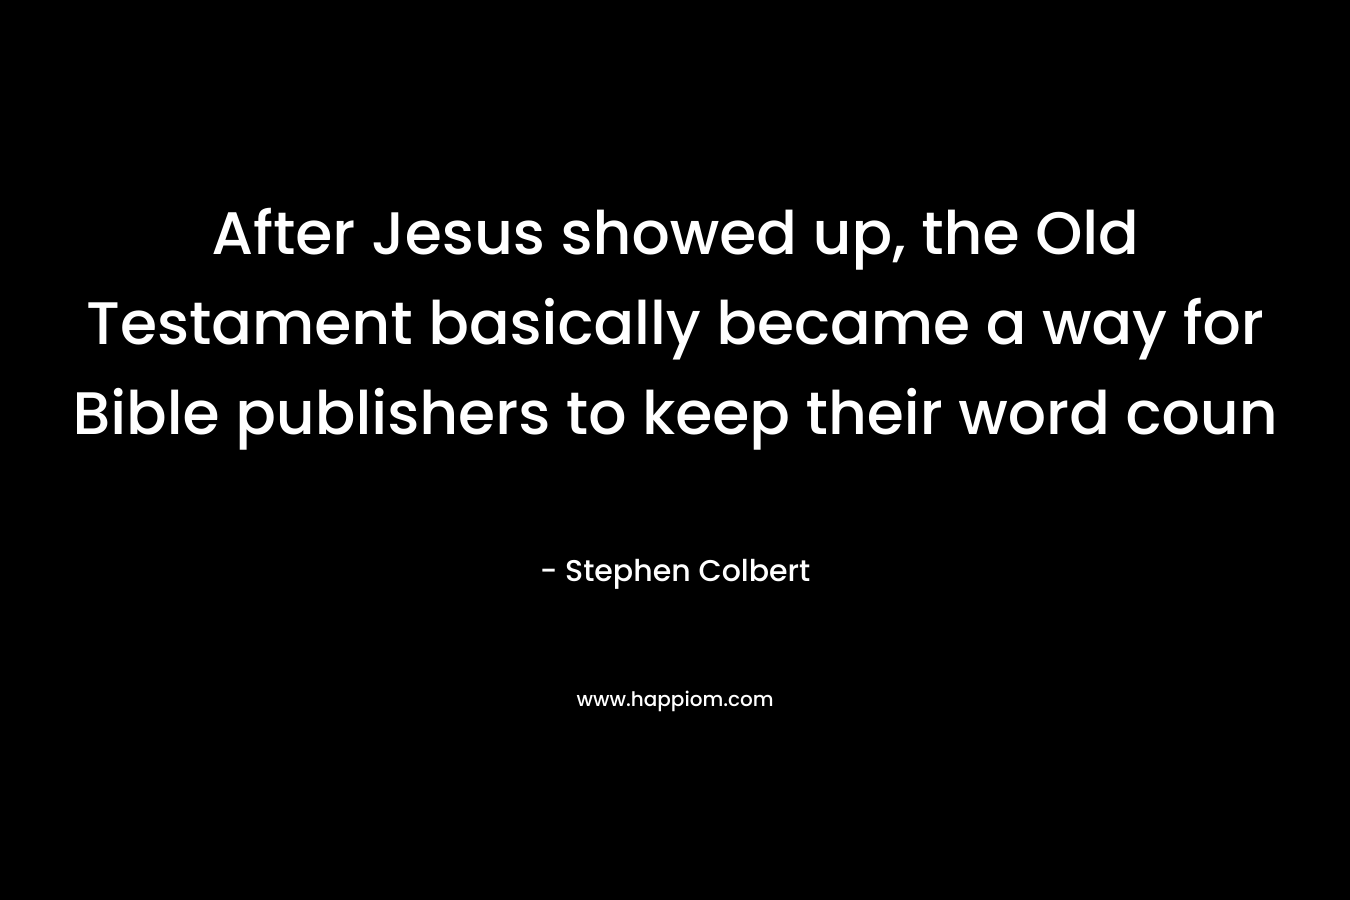 After Jesus showed up, the Old Testament basically became a way for Bible publishers to keep their word coun – Stephen Colbert